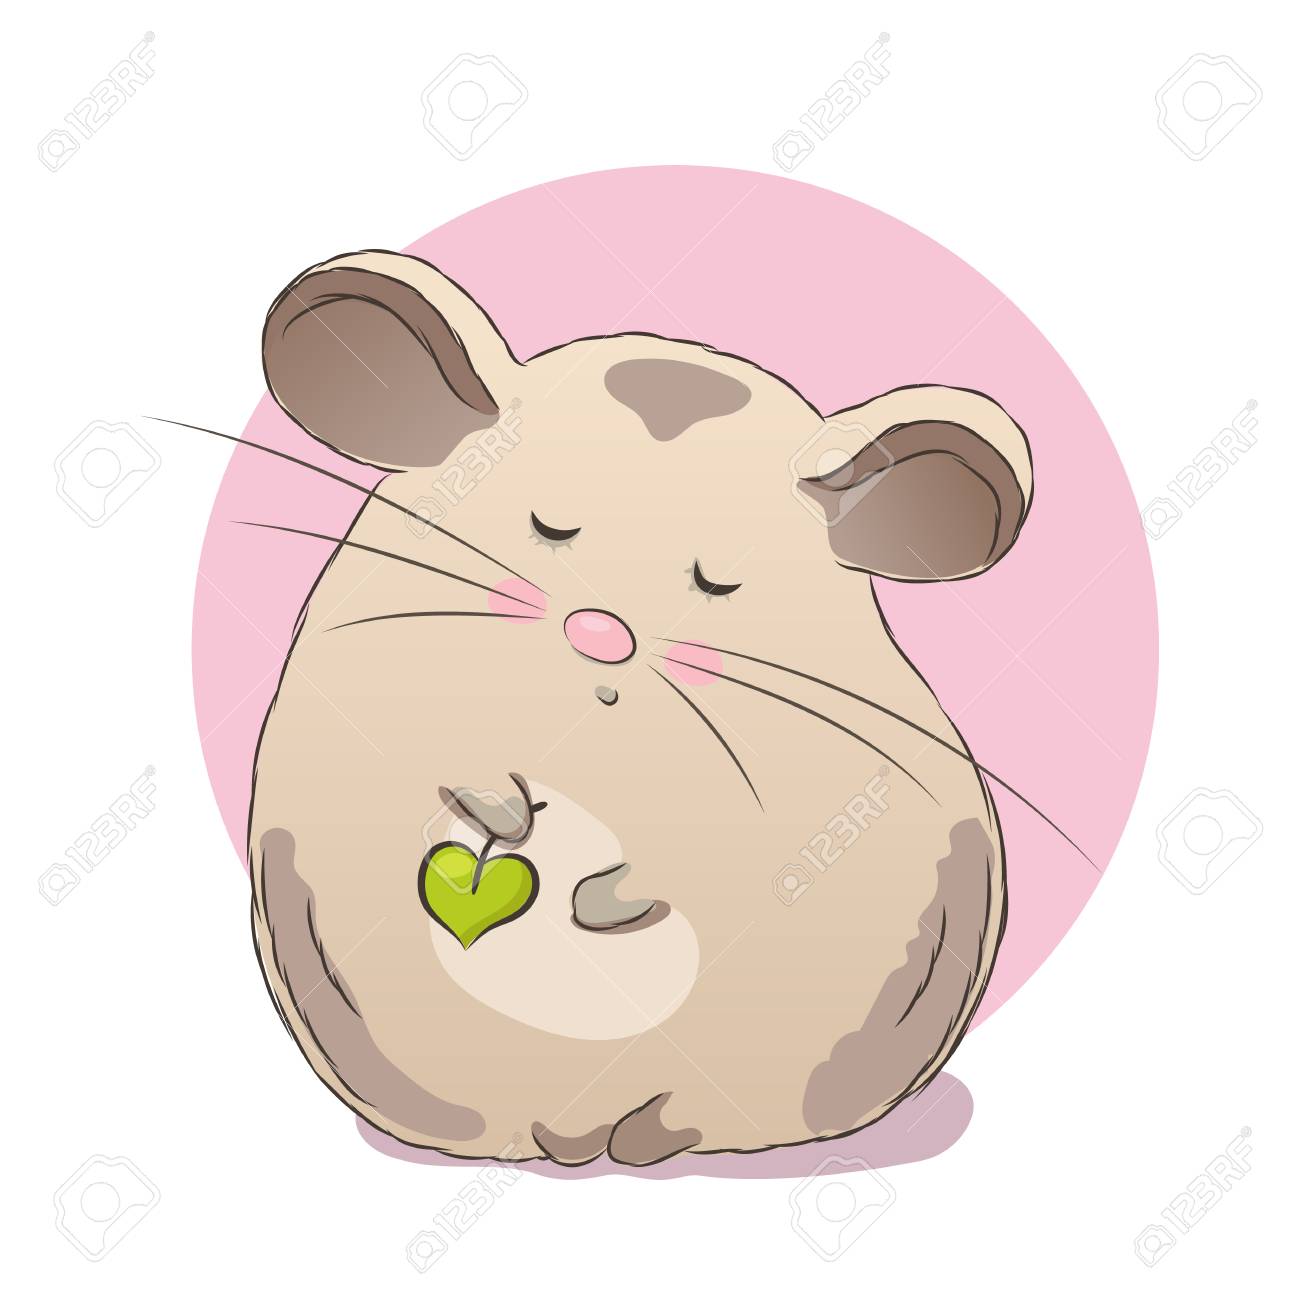 What Dream About Chinchilla Means